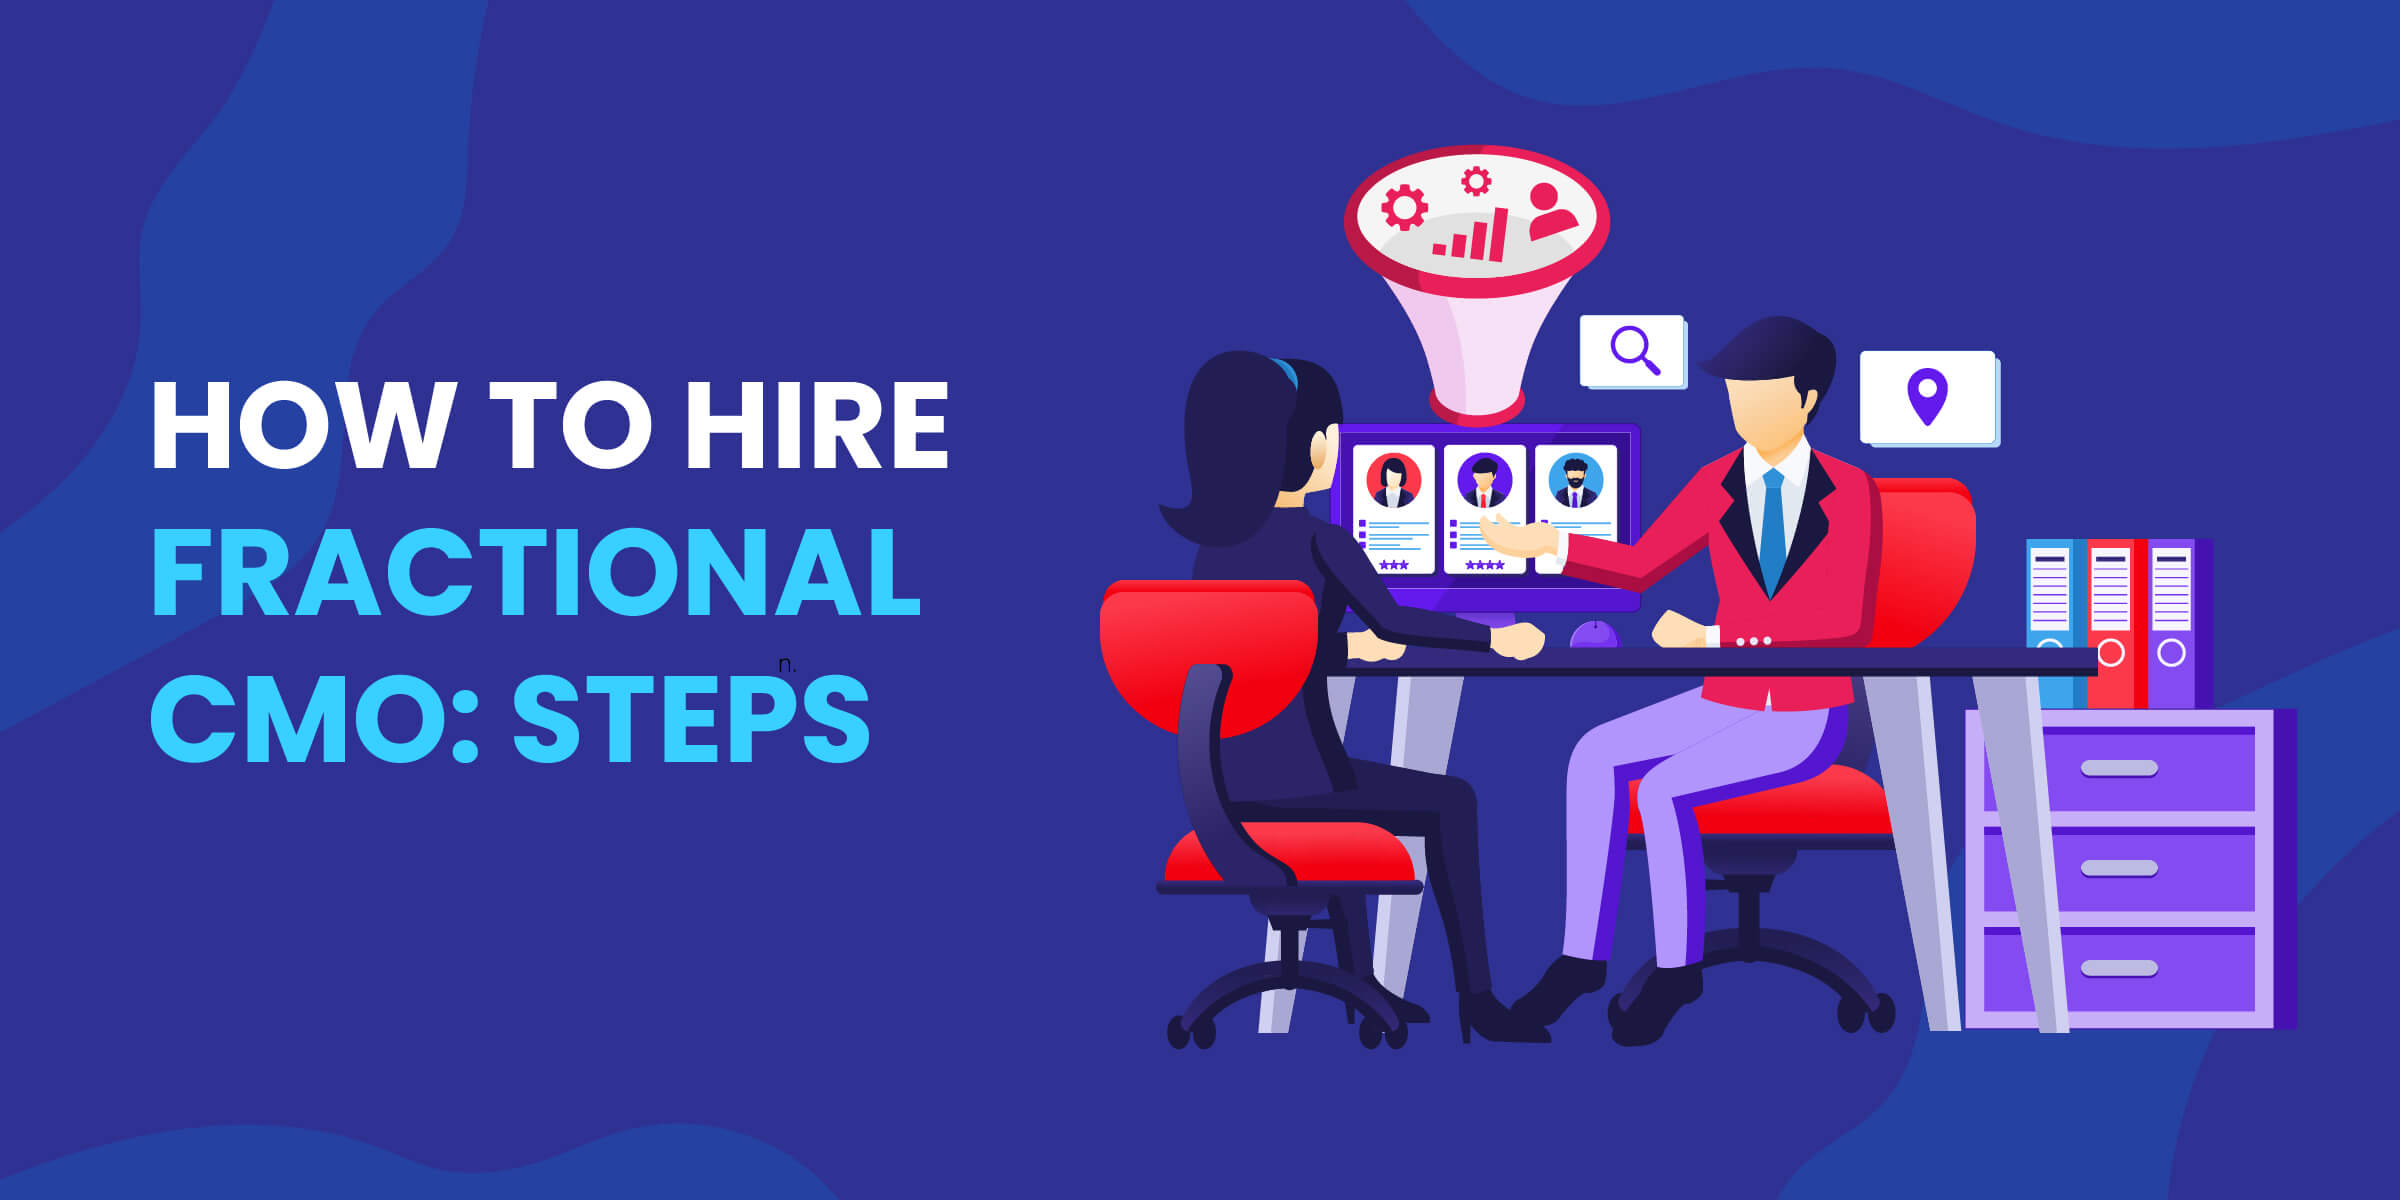 How to Hire Fractional CMO Steps